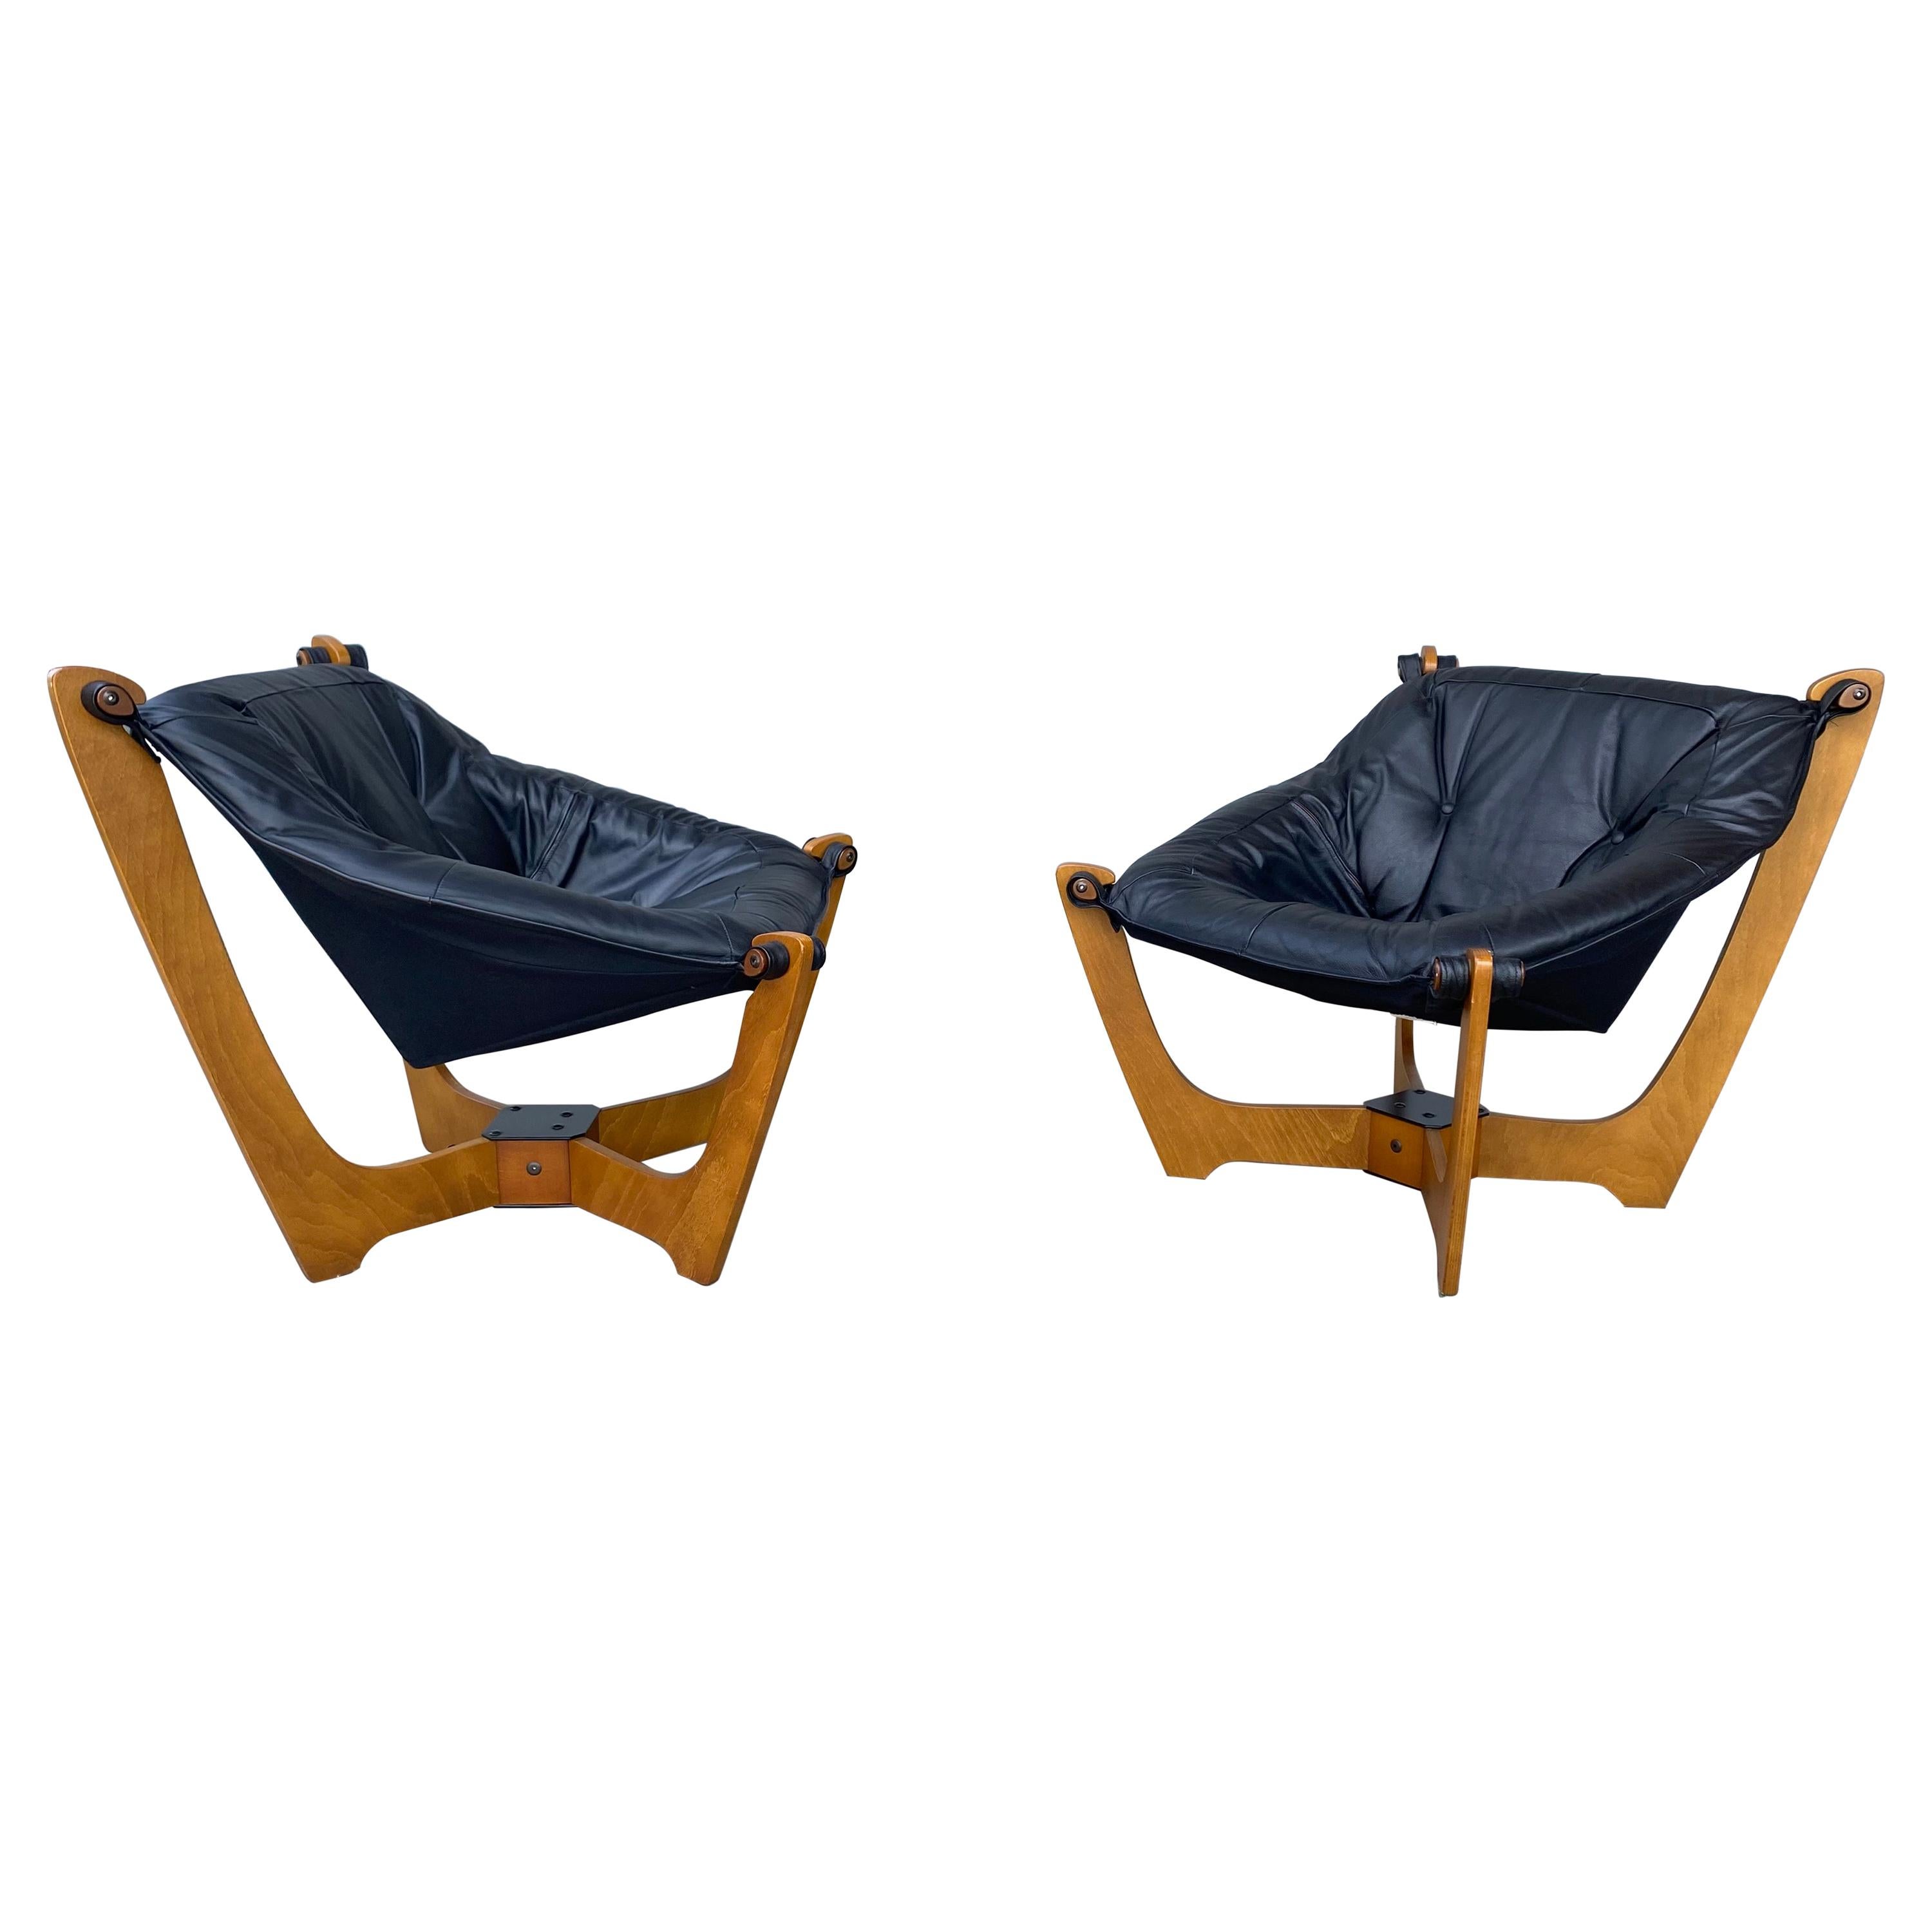 Pair of Luna Black Leather Sling Chairs, Odd Knutsen Norway